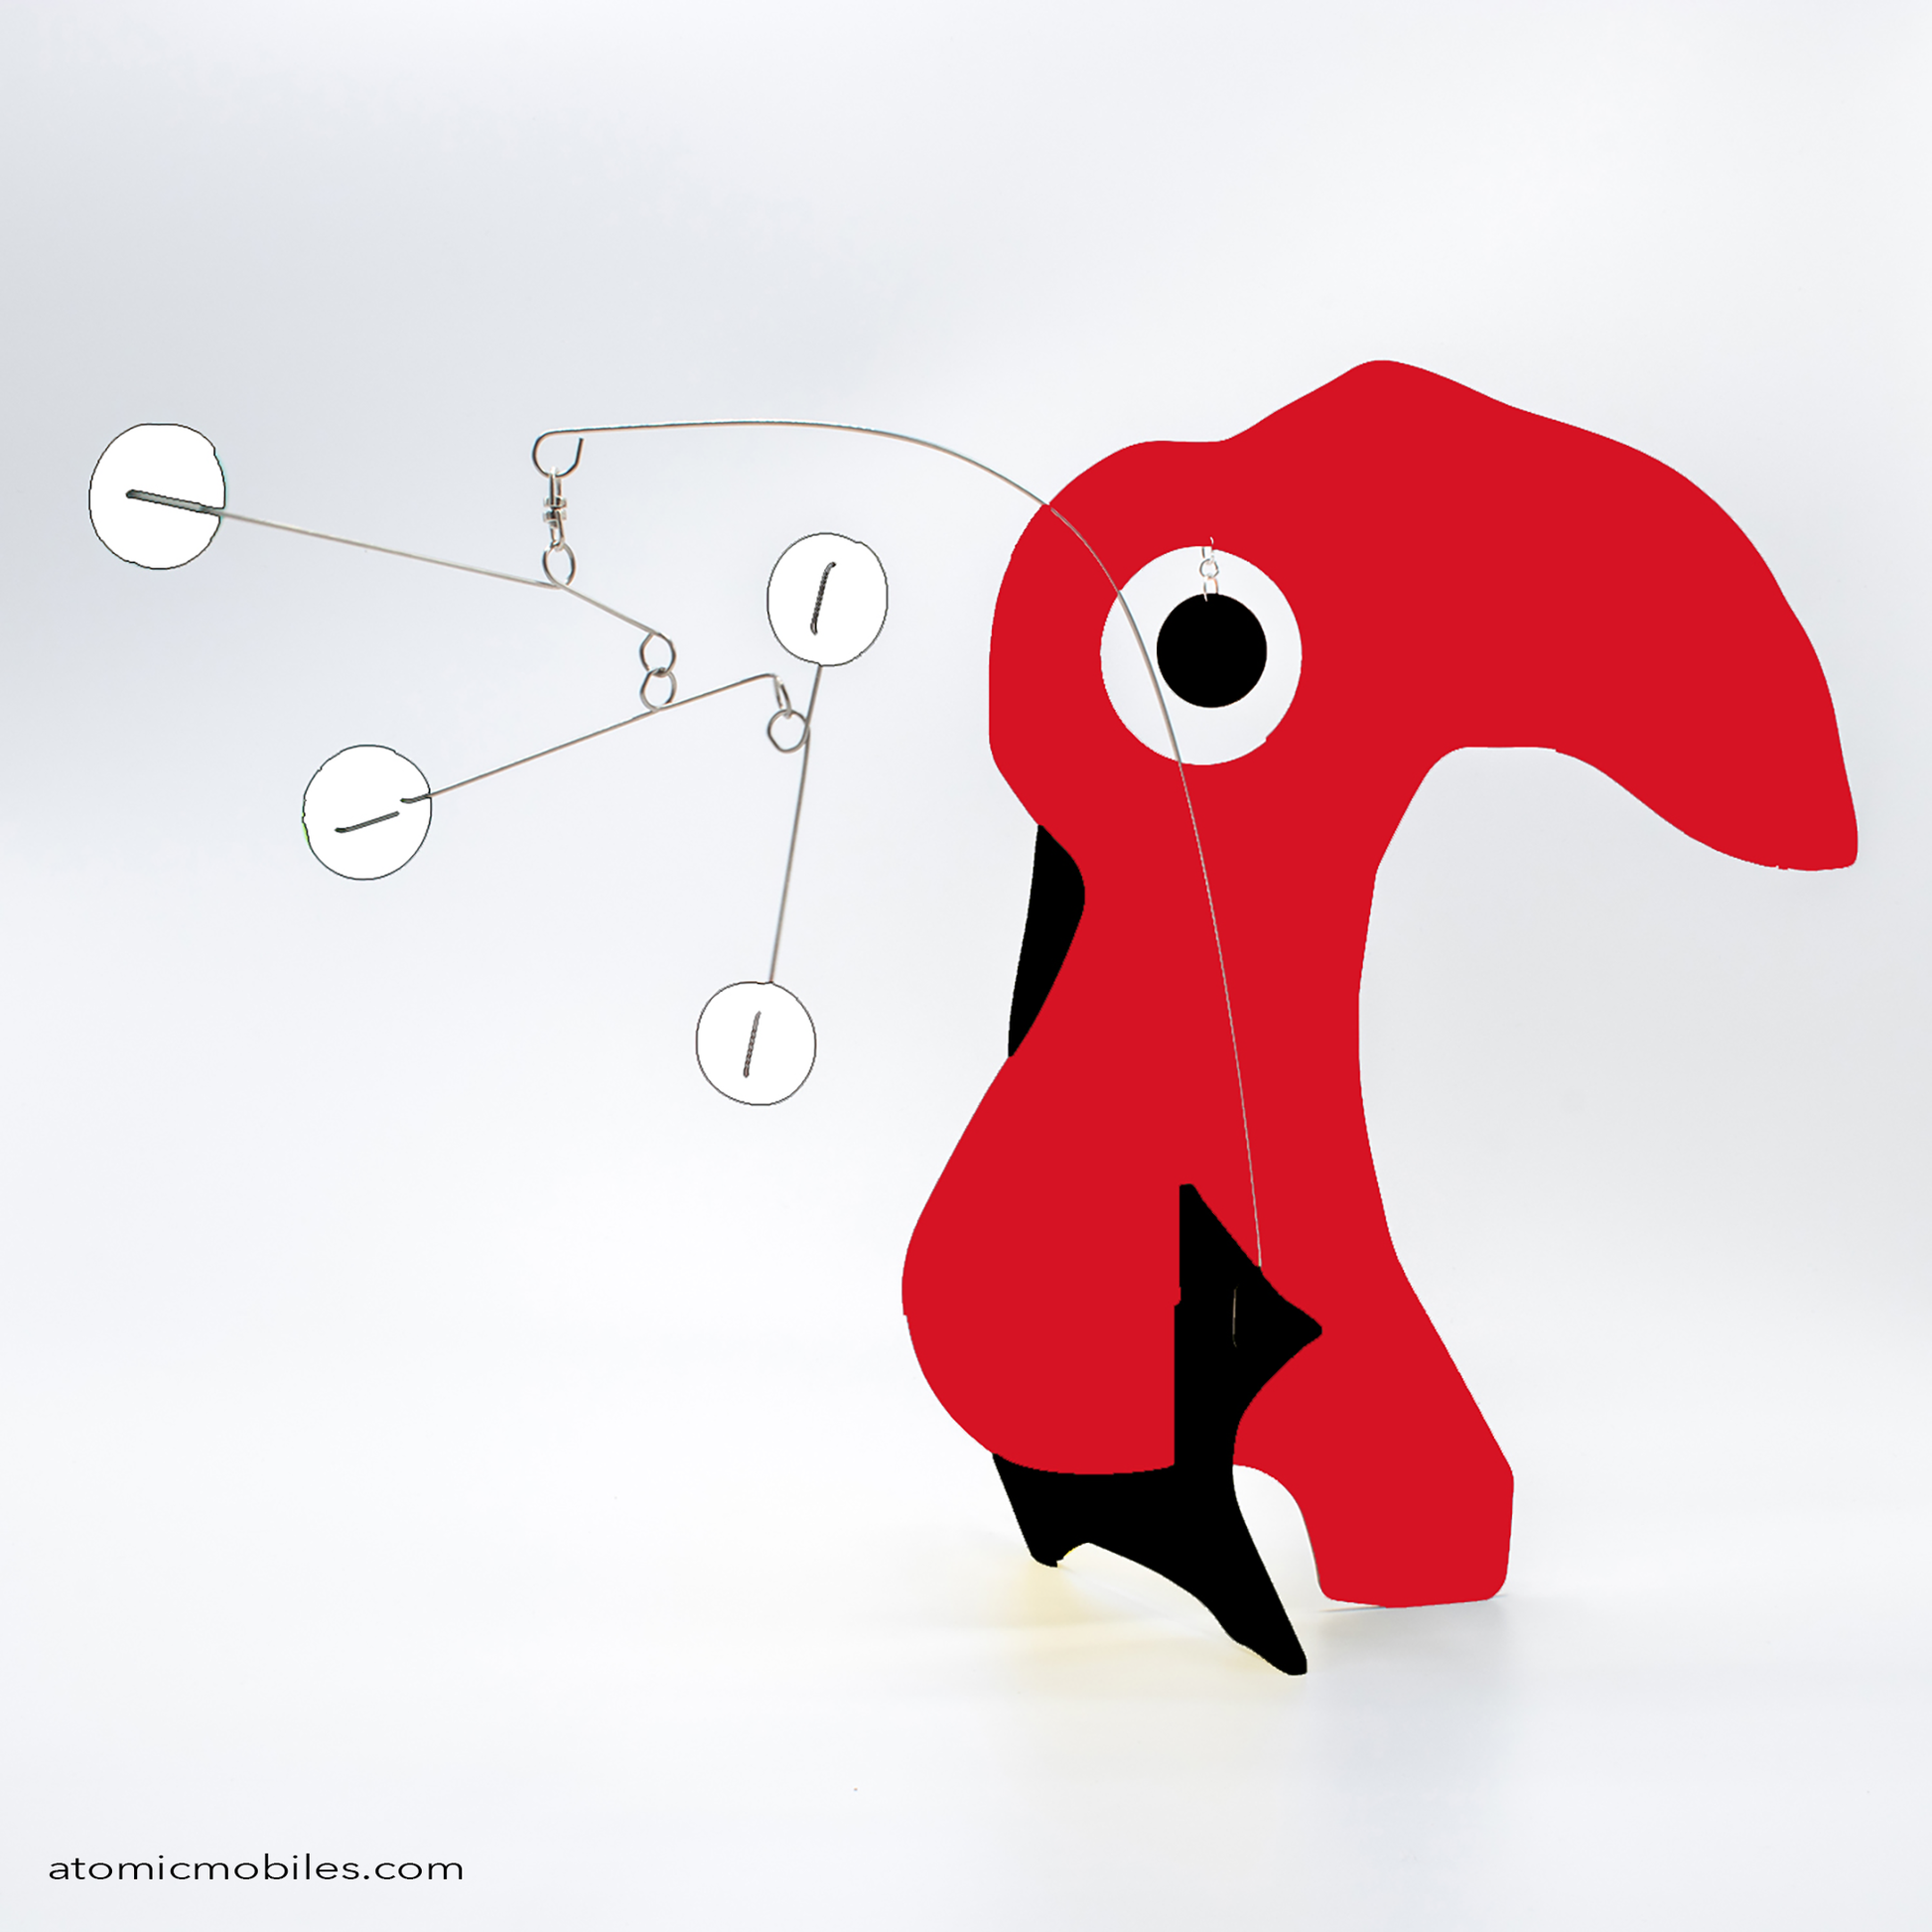 KinetiCats Collection Bird in Red, Black and White - one of 12 Modern Cute Abstract Animal Art Sculpture Kinetic Stabiles inspired by Dada and mid century modern style art by AtomicMobiles.com